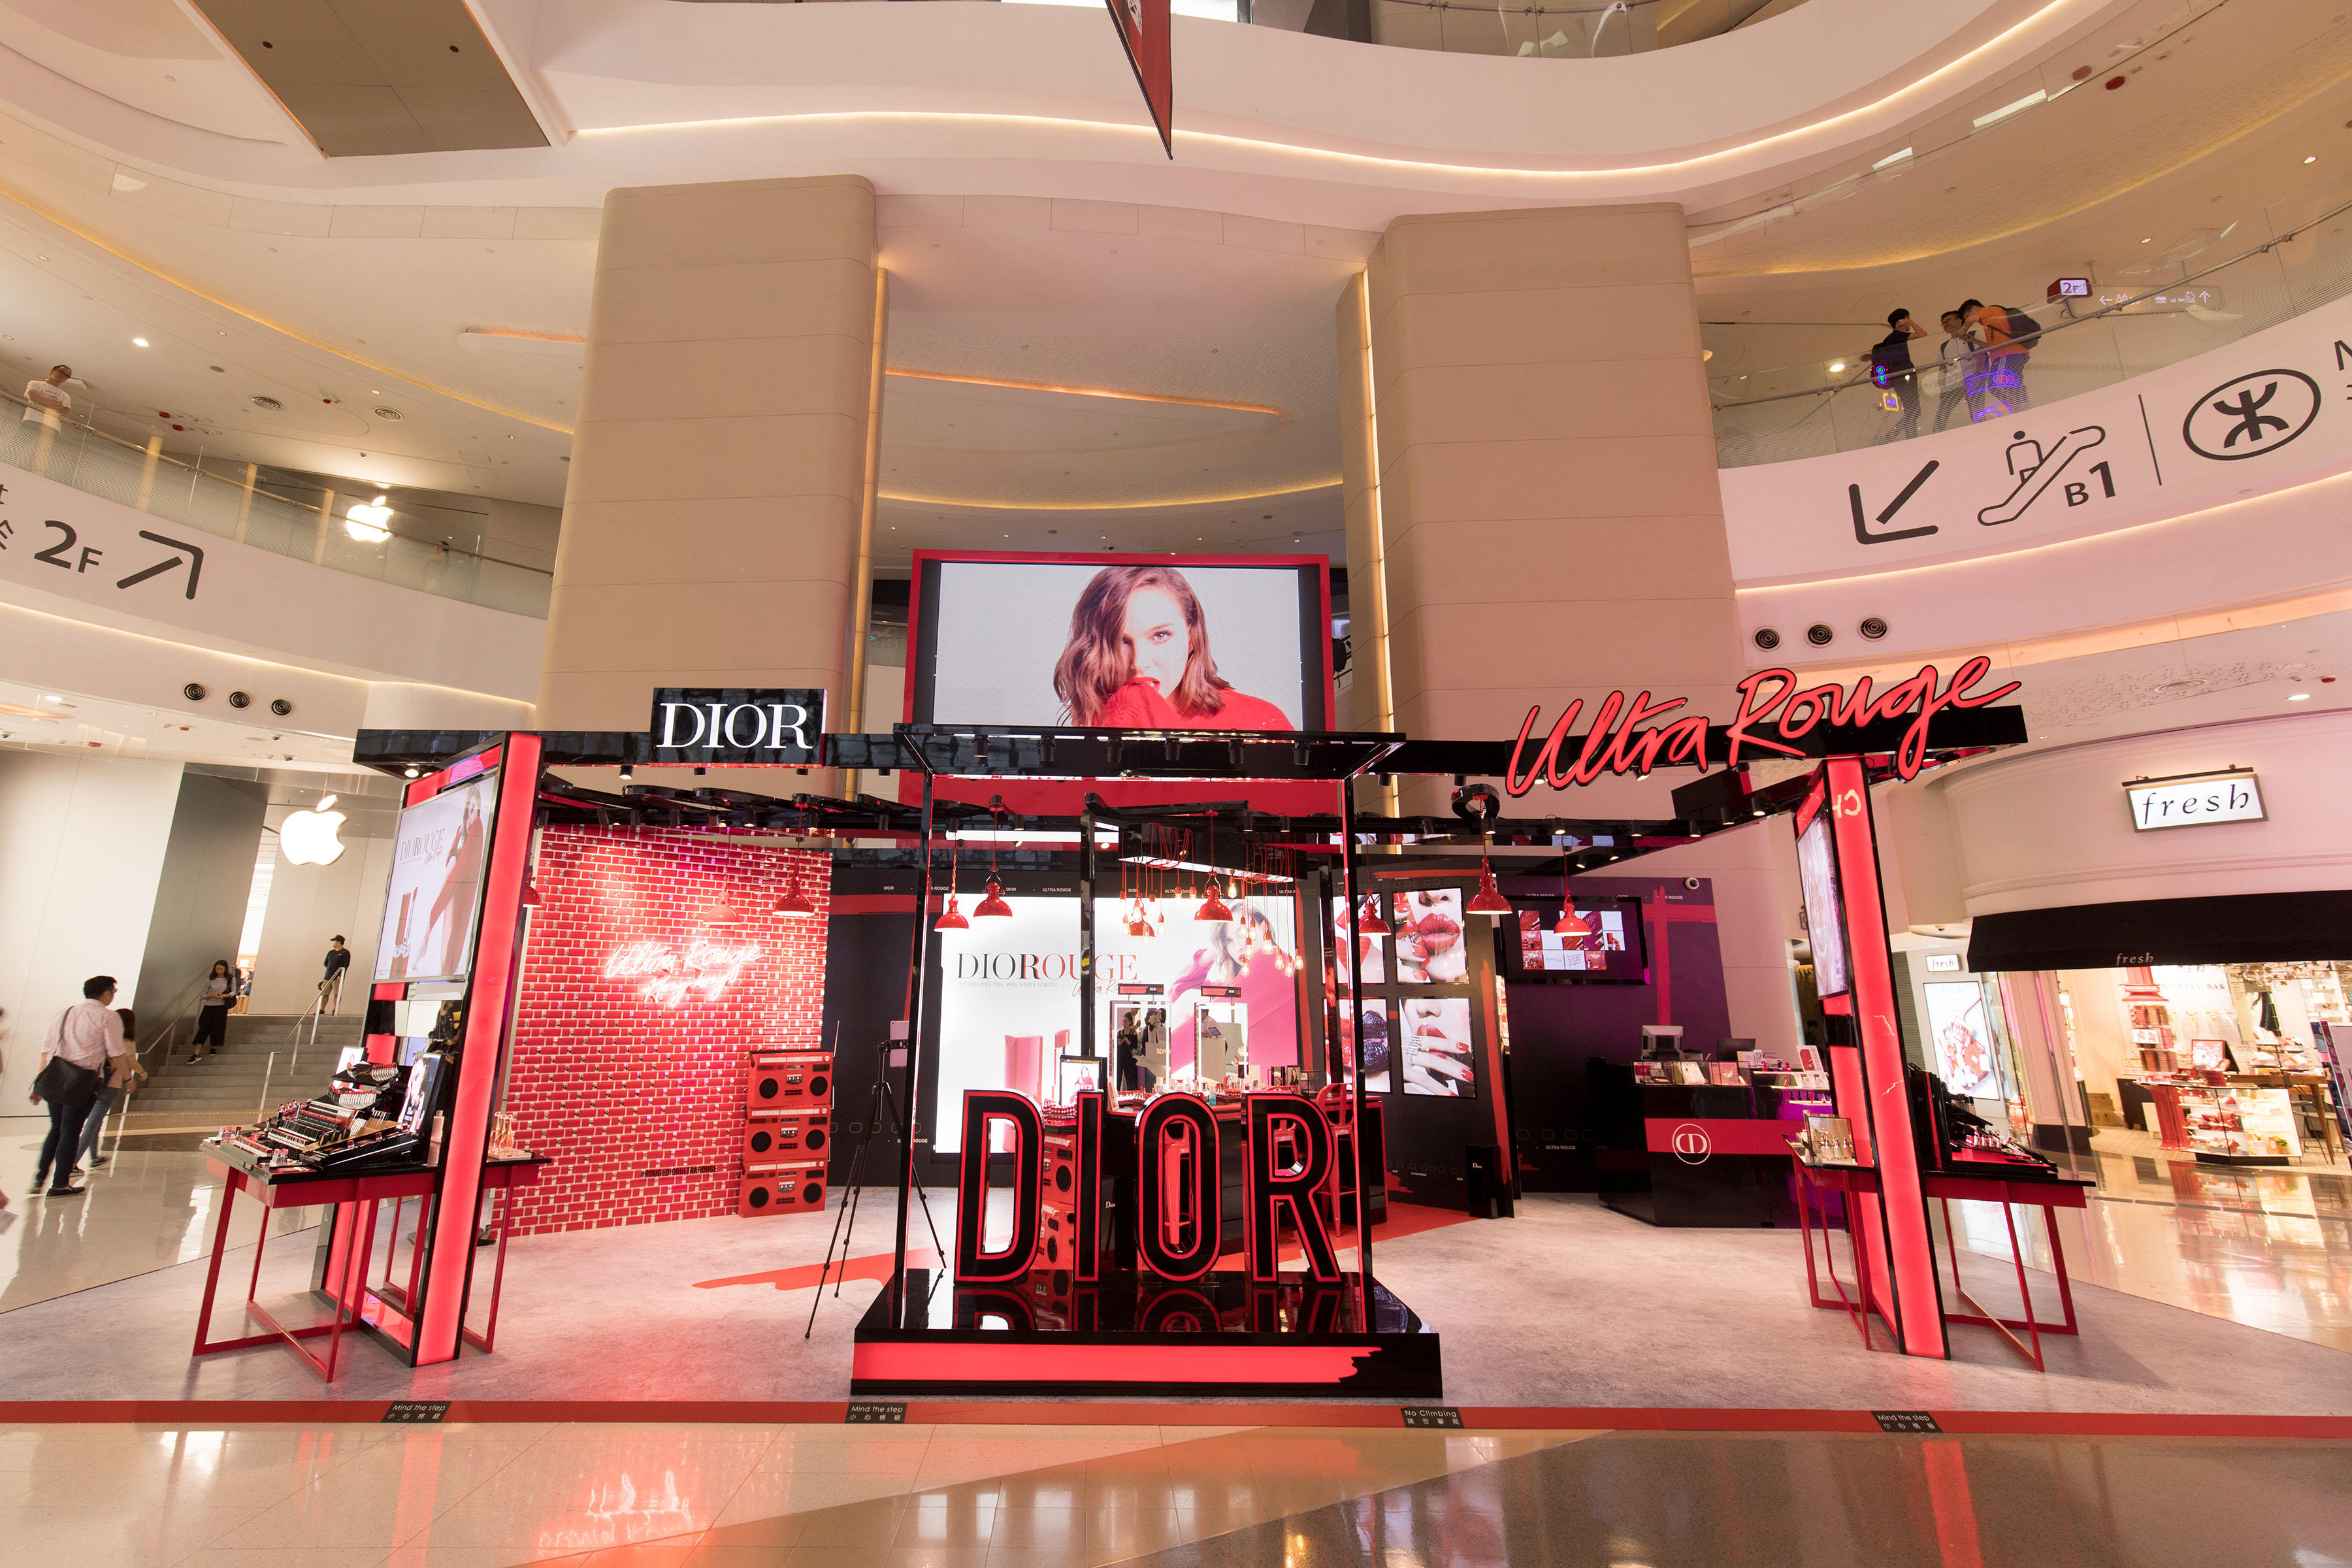 T Galleria Beauty By DFS, Hysan Place, Hong Kong - Commtech Asia